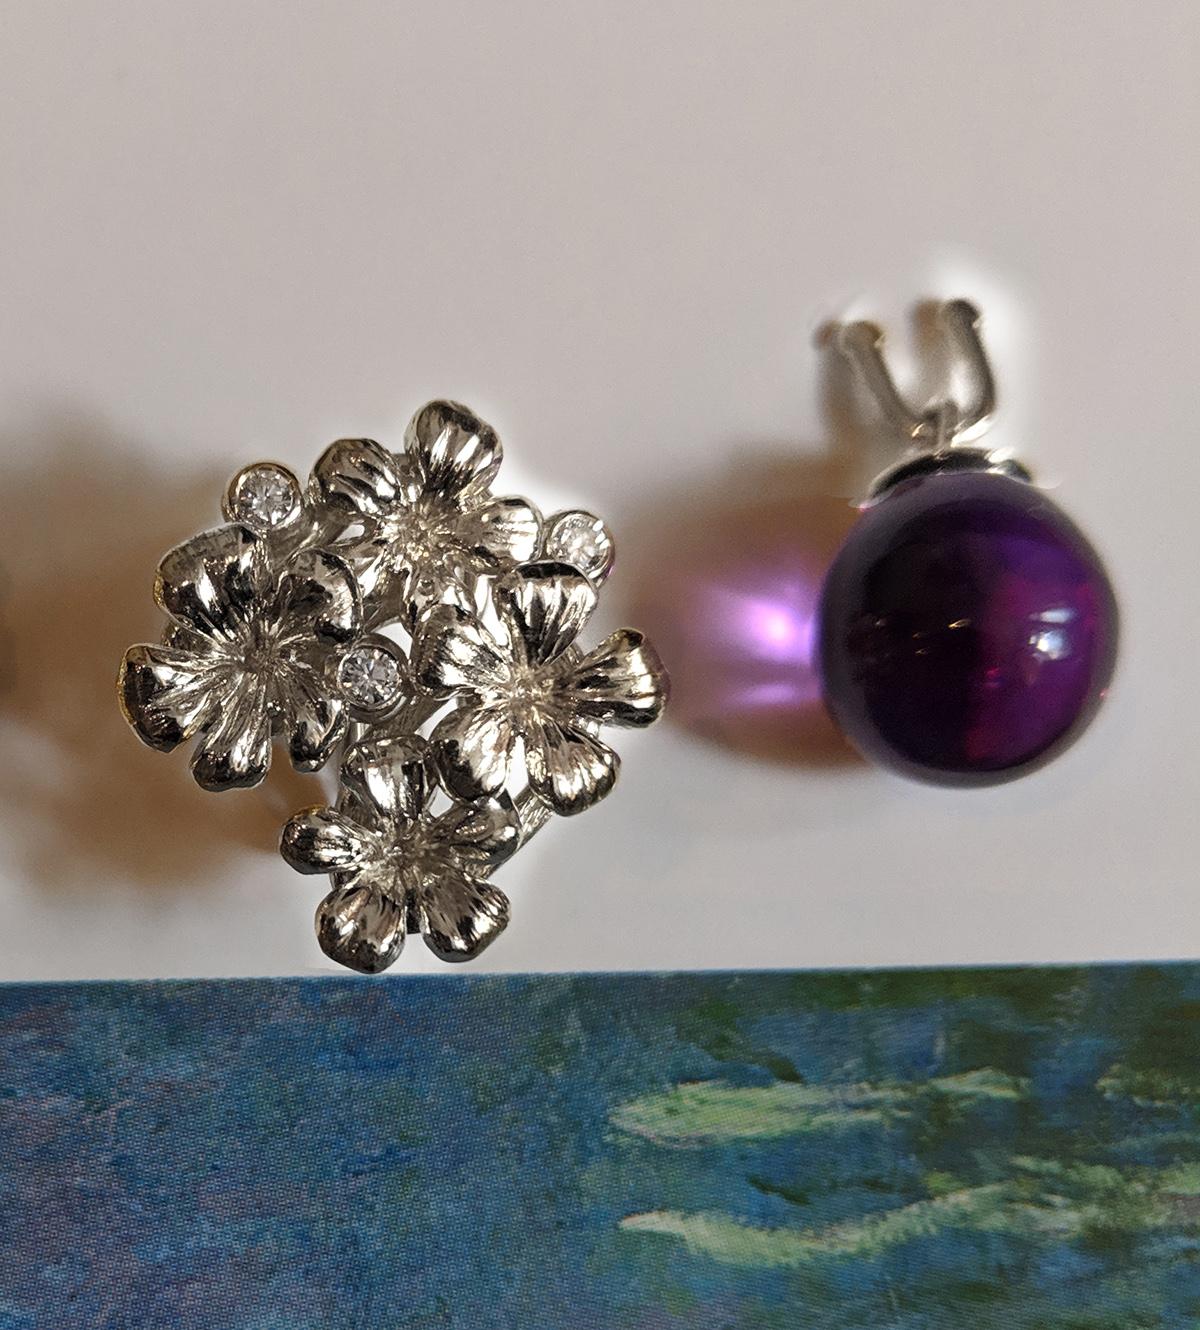 18 karat white gold Plum Blossom brooch with a removable amethyst drop, encrusted with 3 round diamonds, is a contemporary jewellery piece that has been featured in Vogue UA reviews. The cabochon gem can be easily replaced with other gem drops. We